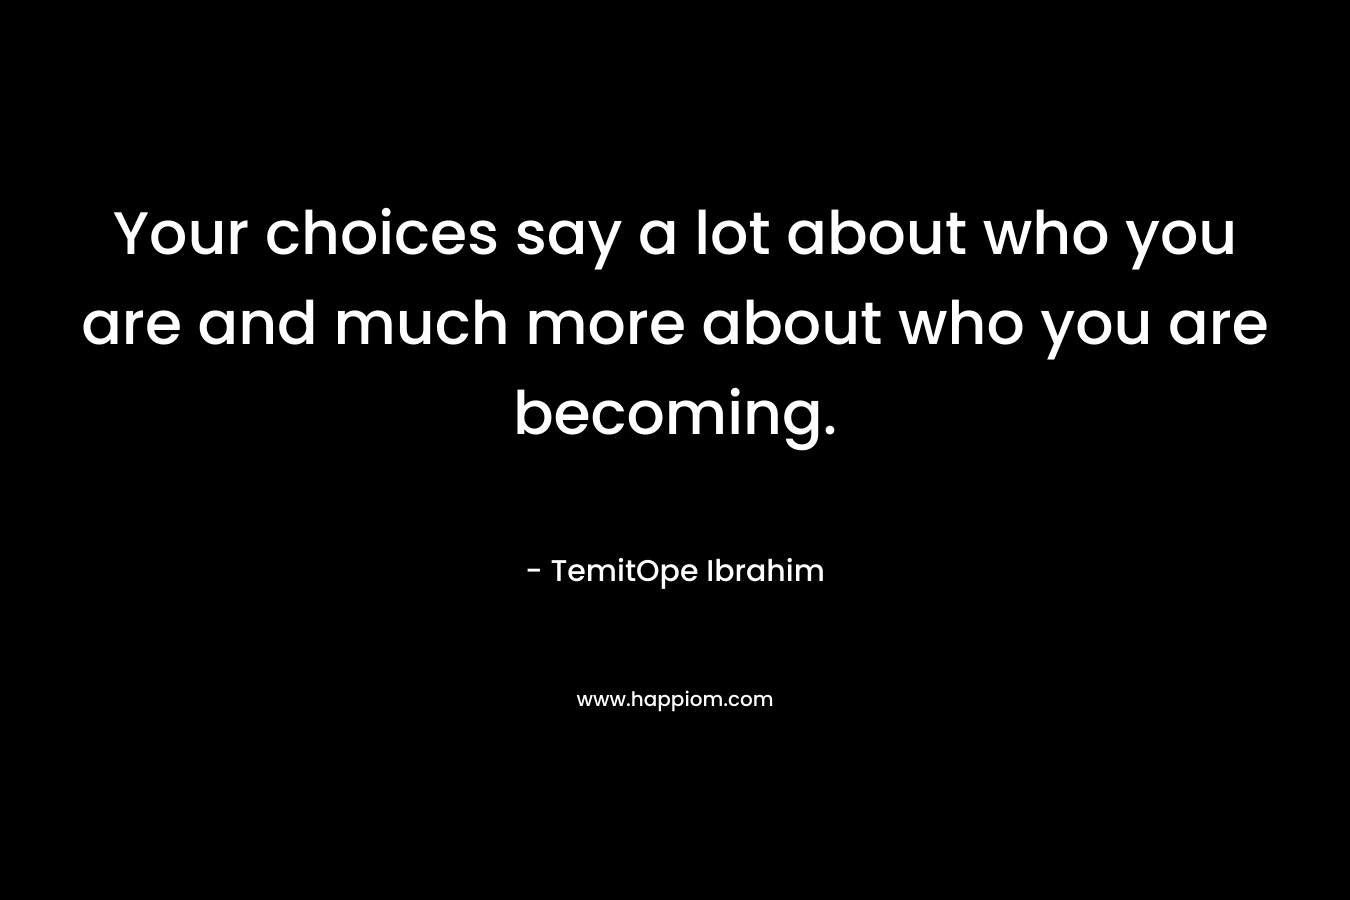 Your choices say a lot about who you are and much more about who you are becoming. – TemitOpe Ibrahim